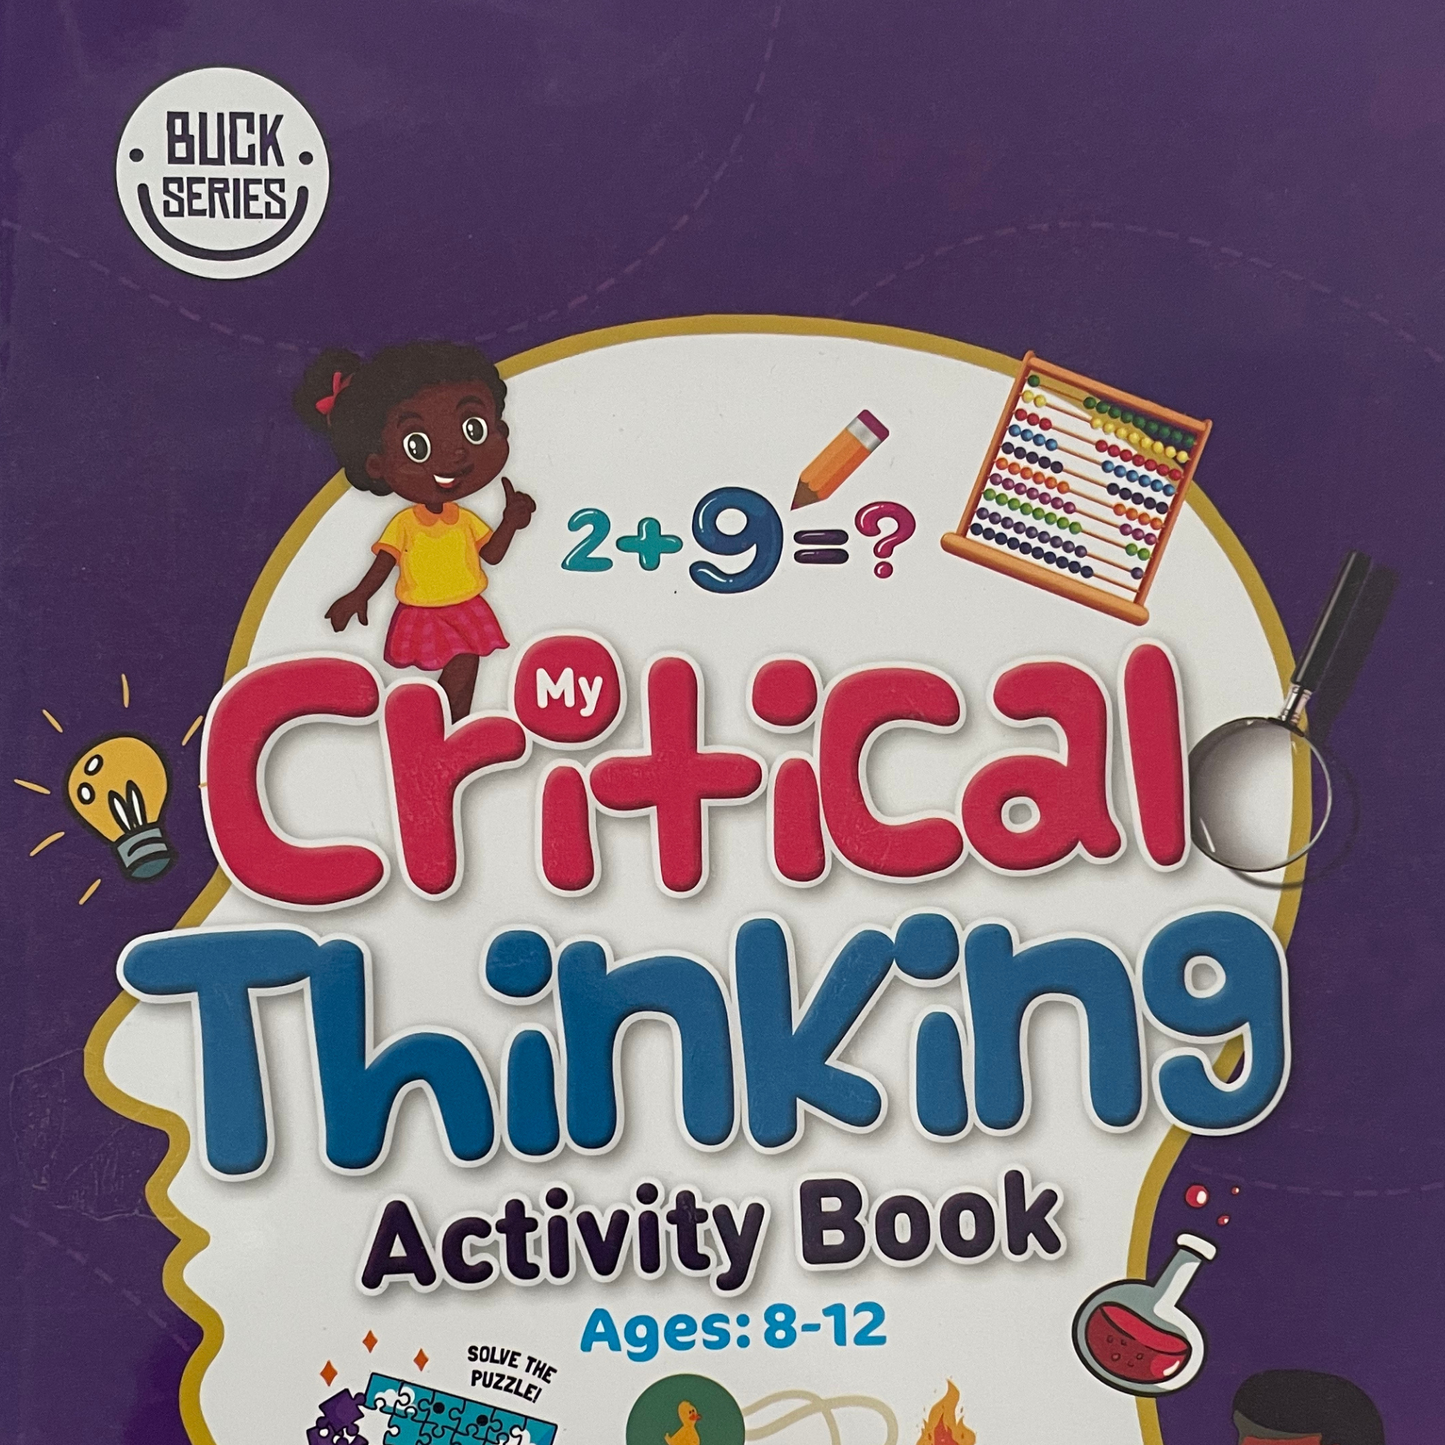 My Critical Thinking Activity Book